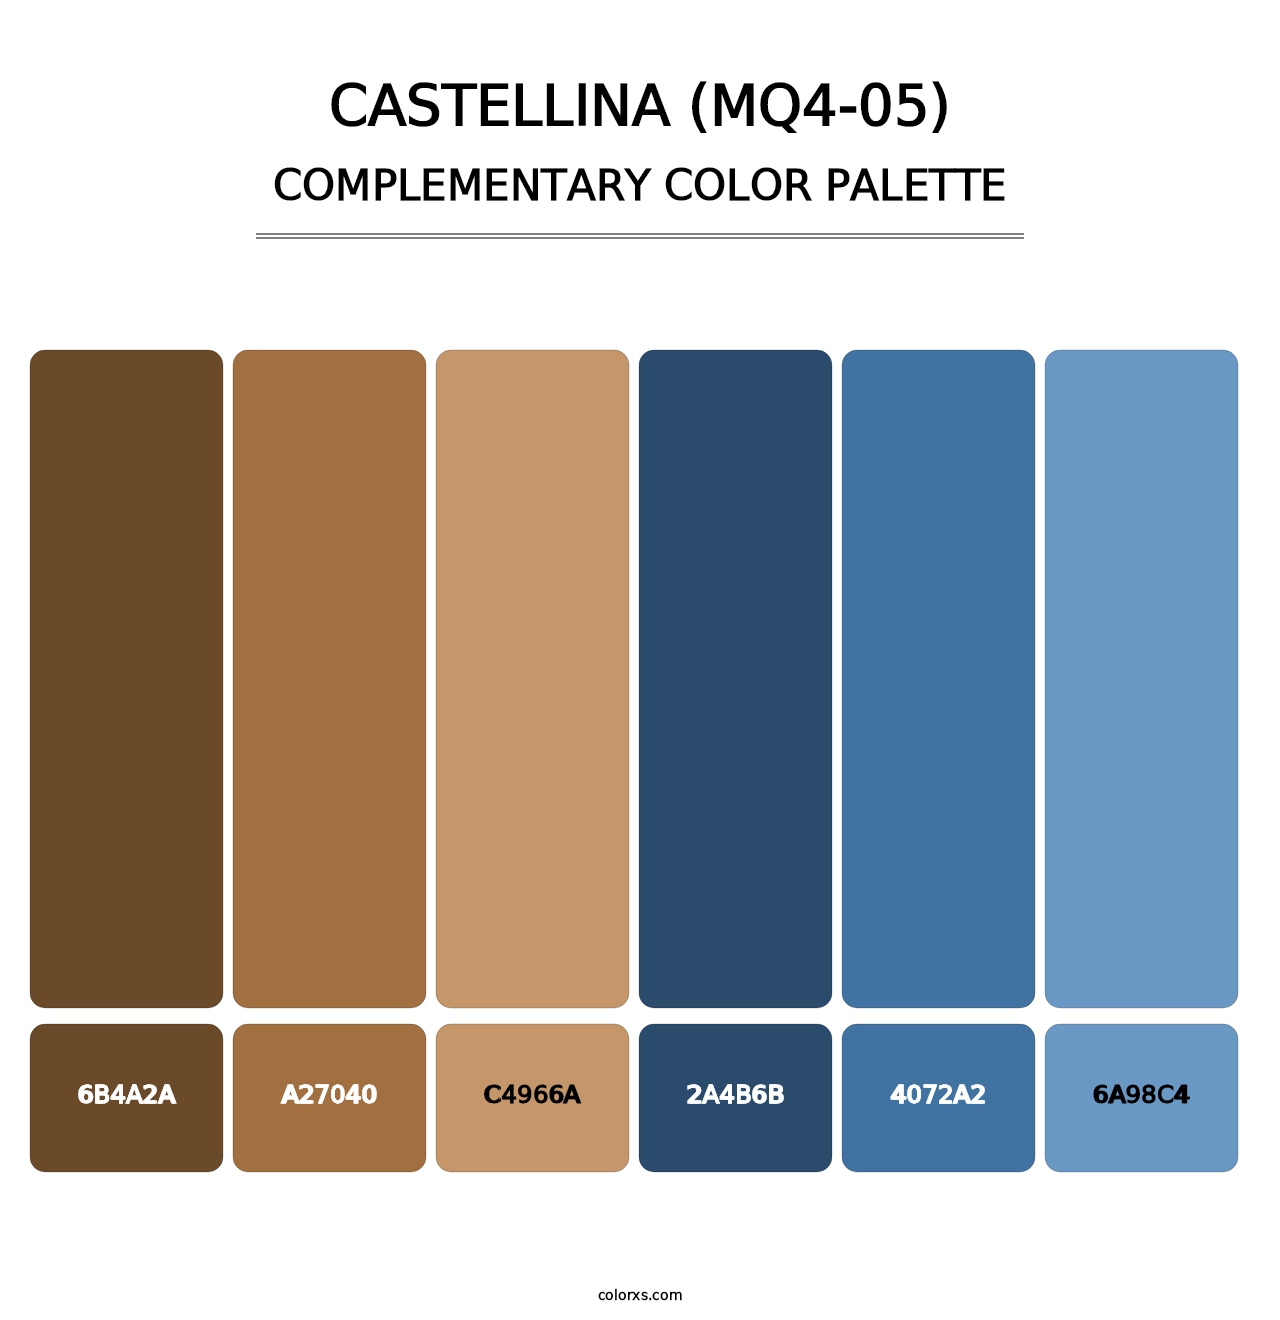 Castellina (MQ4-05) - Complementary Color Palette